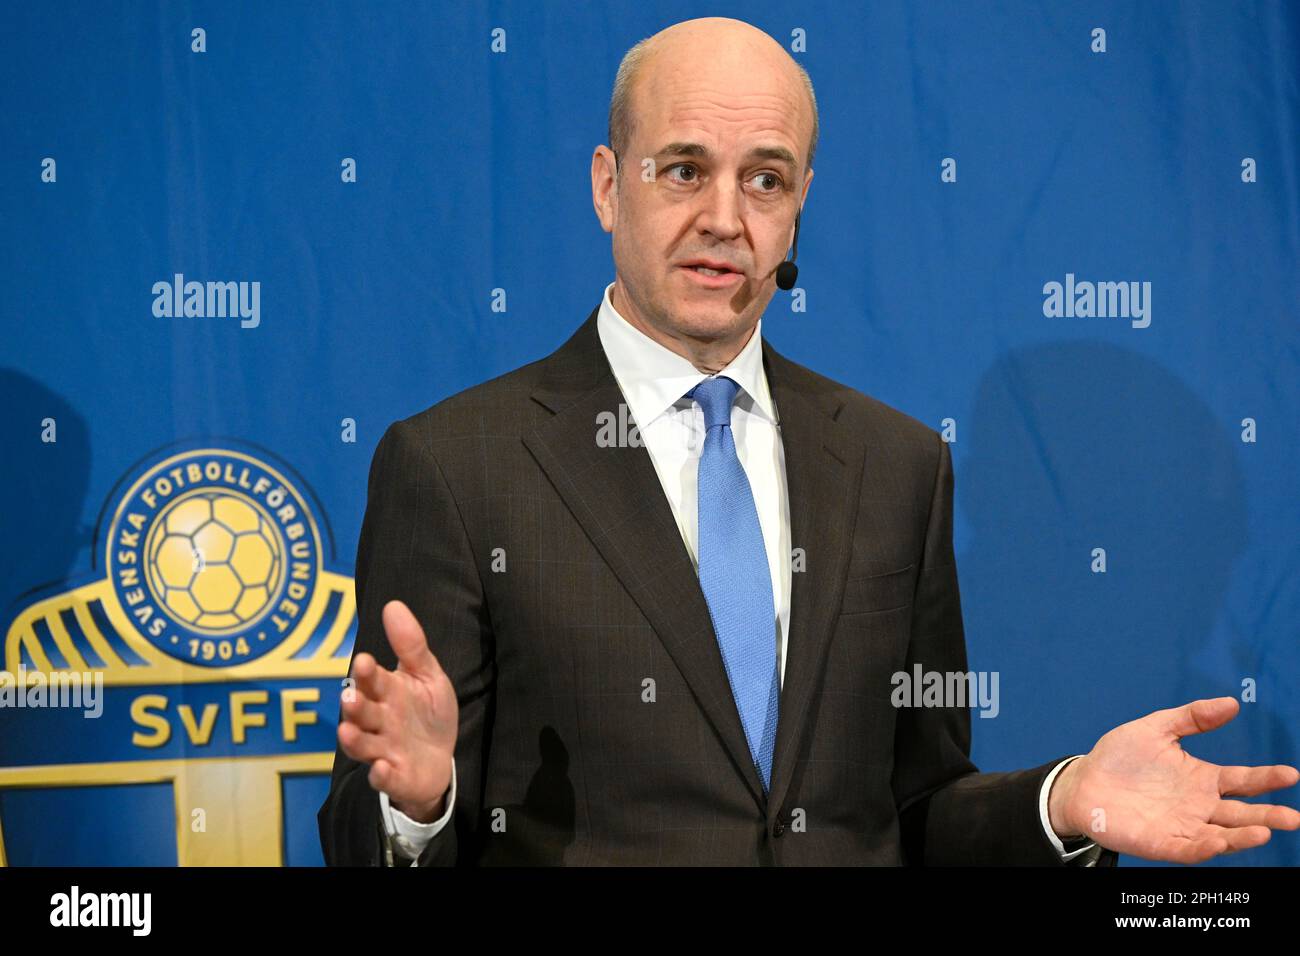 Press call with Fredrik Reinfeldt who has been elected to new president of the Swedish Football Association. Reinfeldt is a former prime minister of S Stock Photo